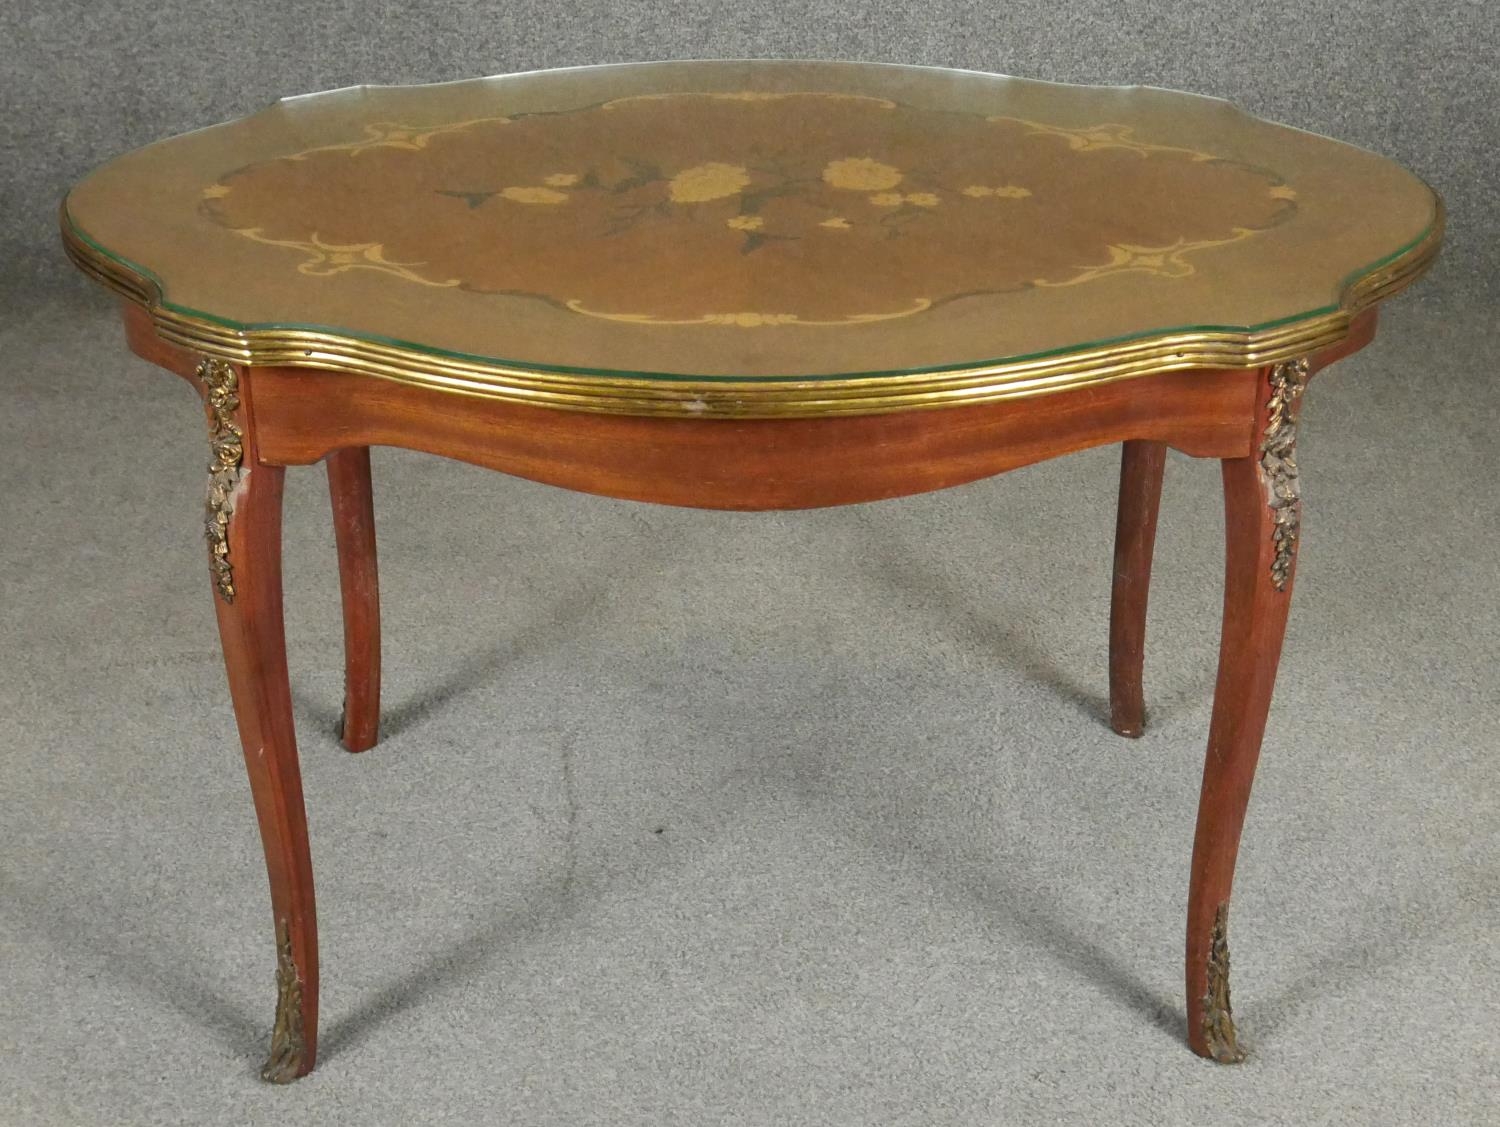 An Italian walnut and floral inlaid occasional table with shaped glass top on ormolu mounted